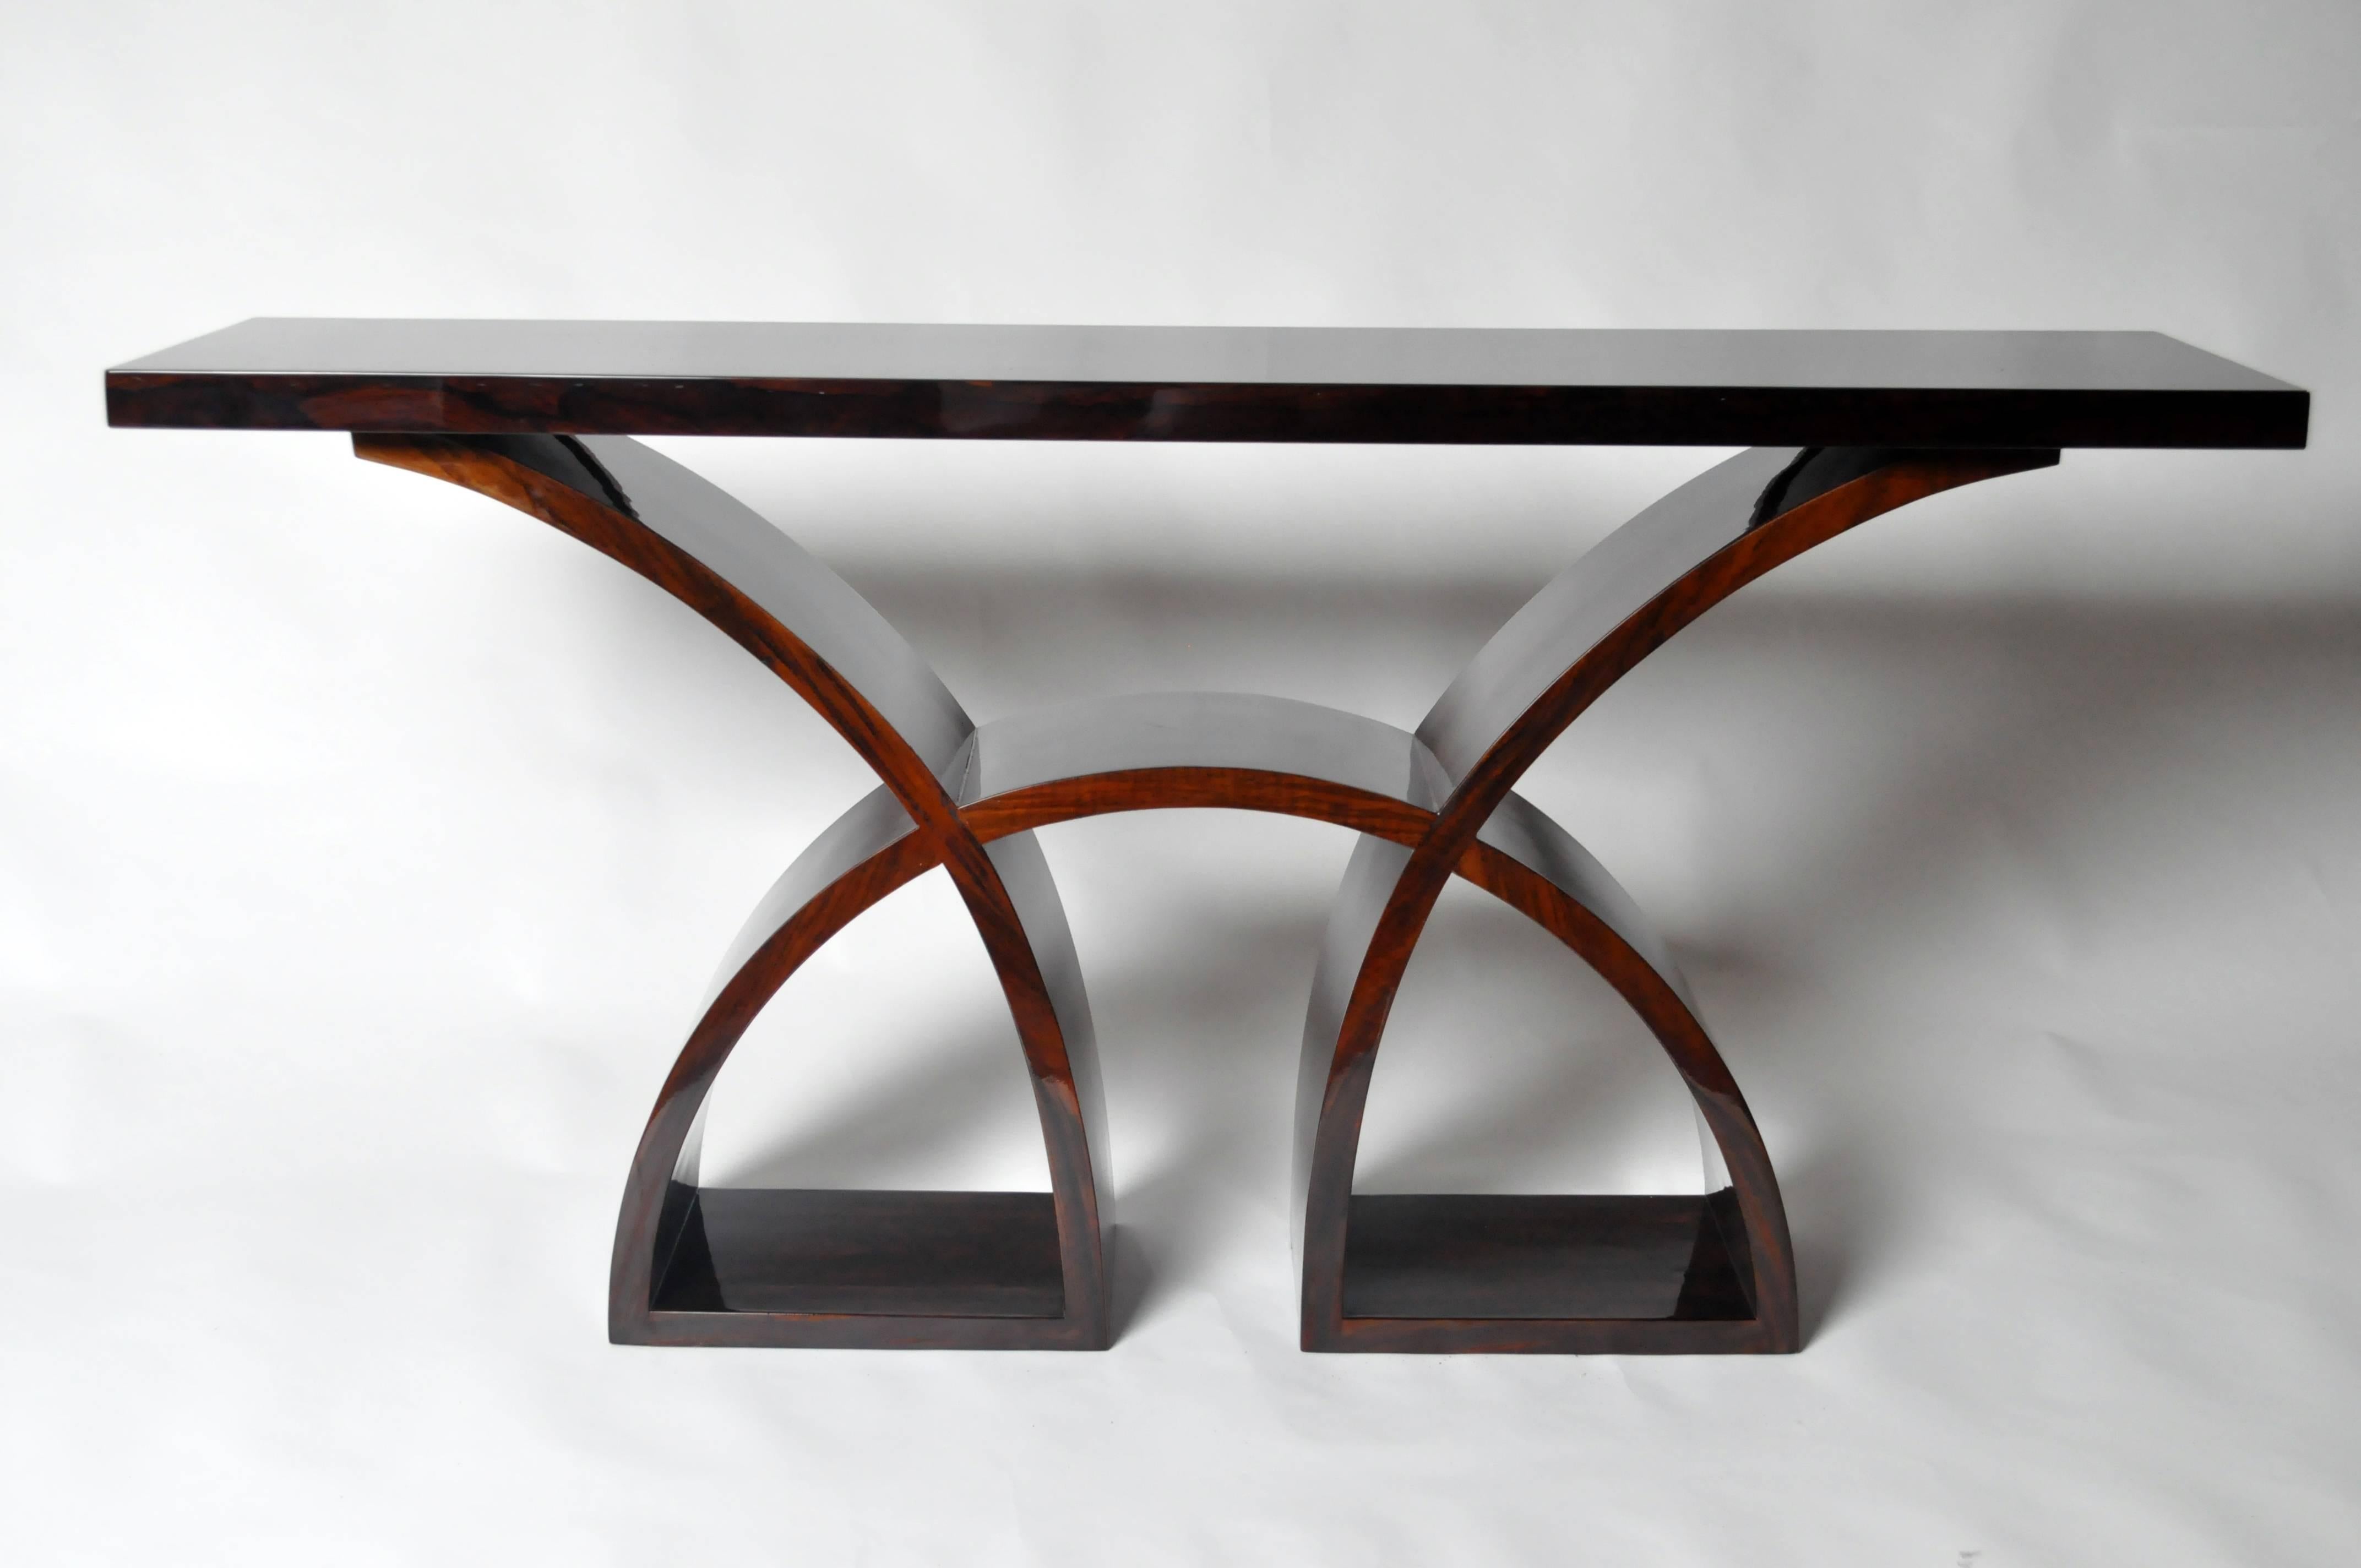 This elegant Art Deco style console table is from Budapest and is made from walnut veneer.